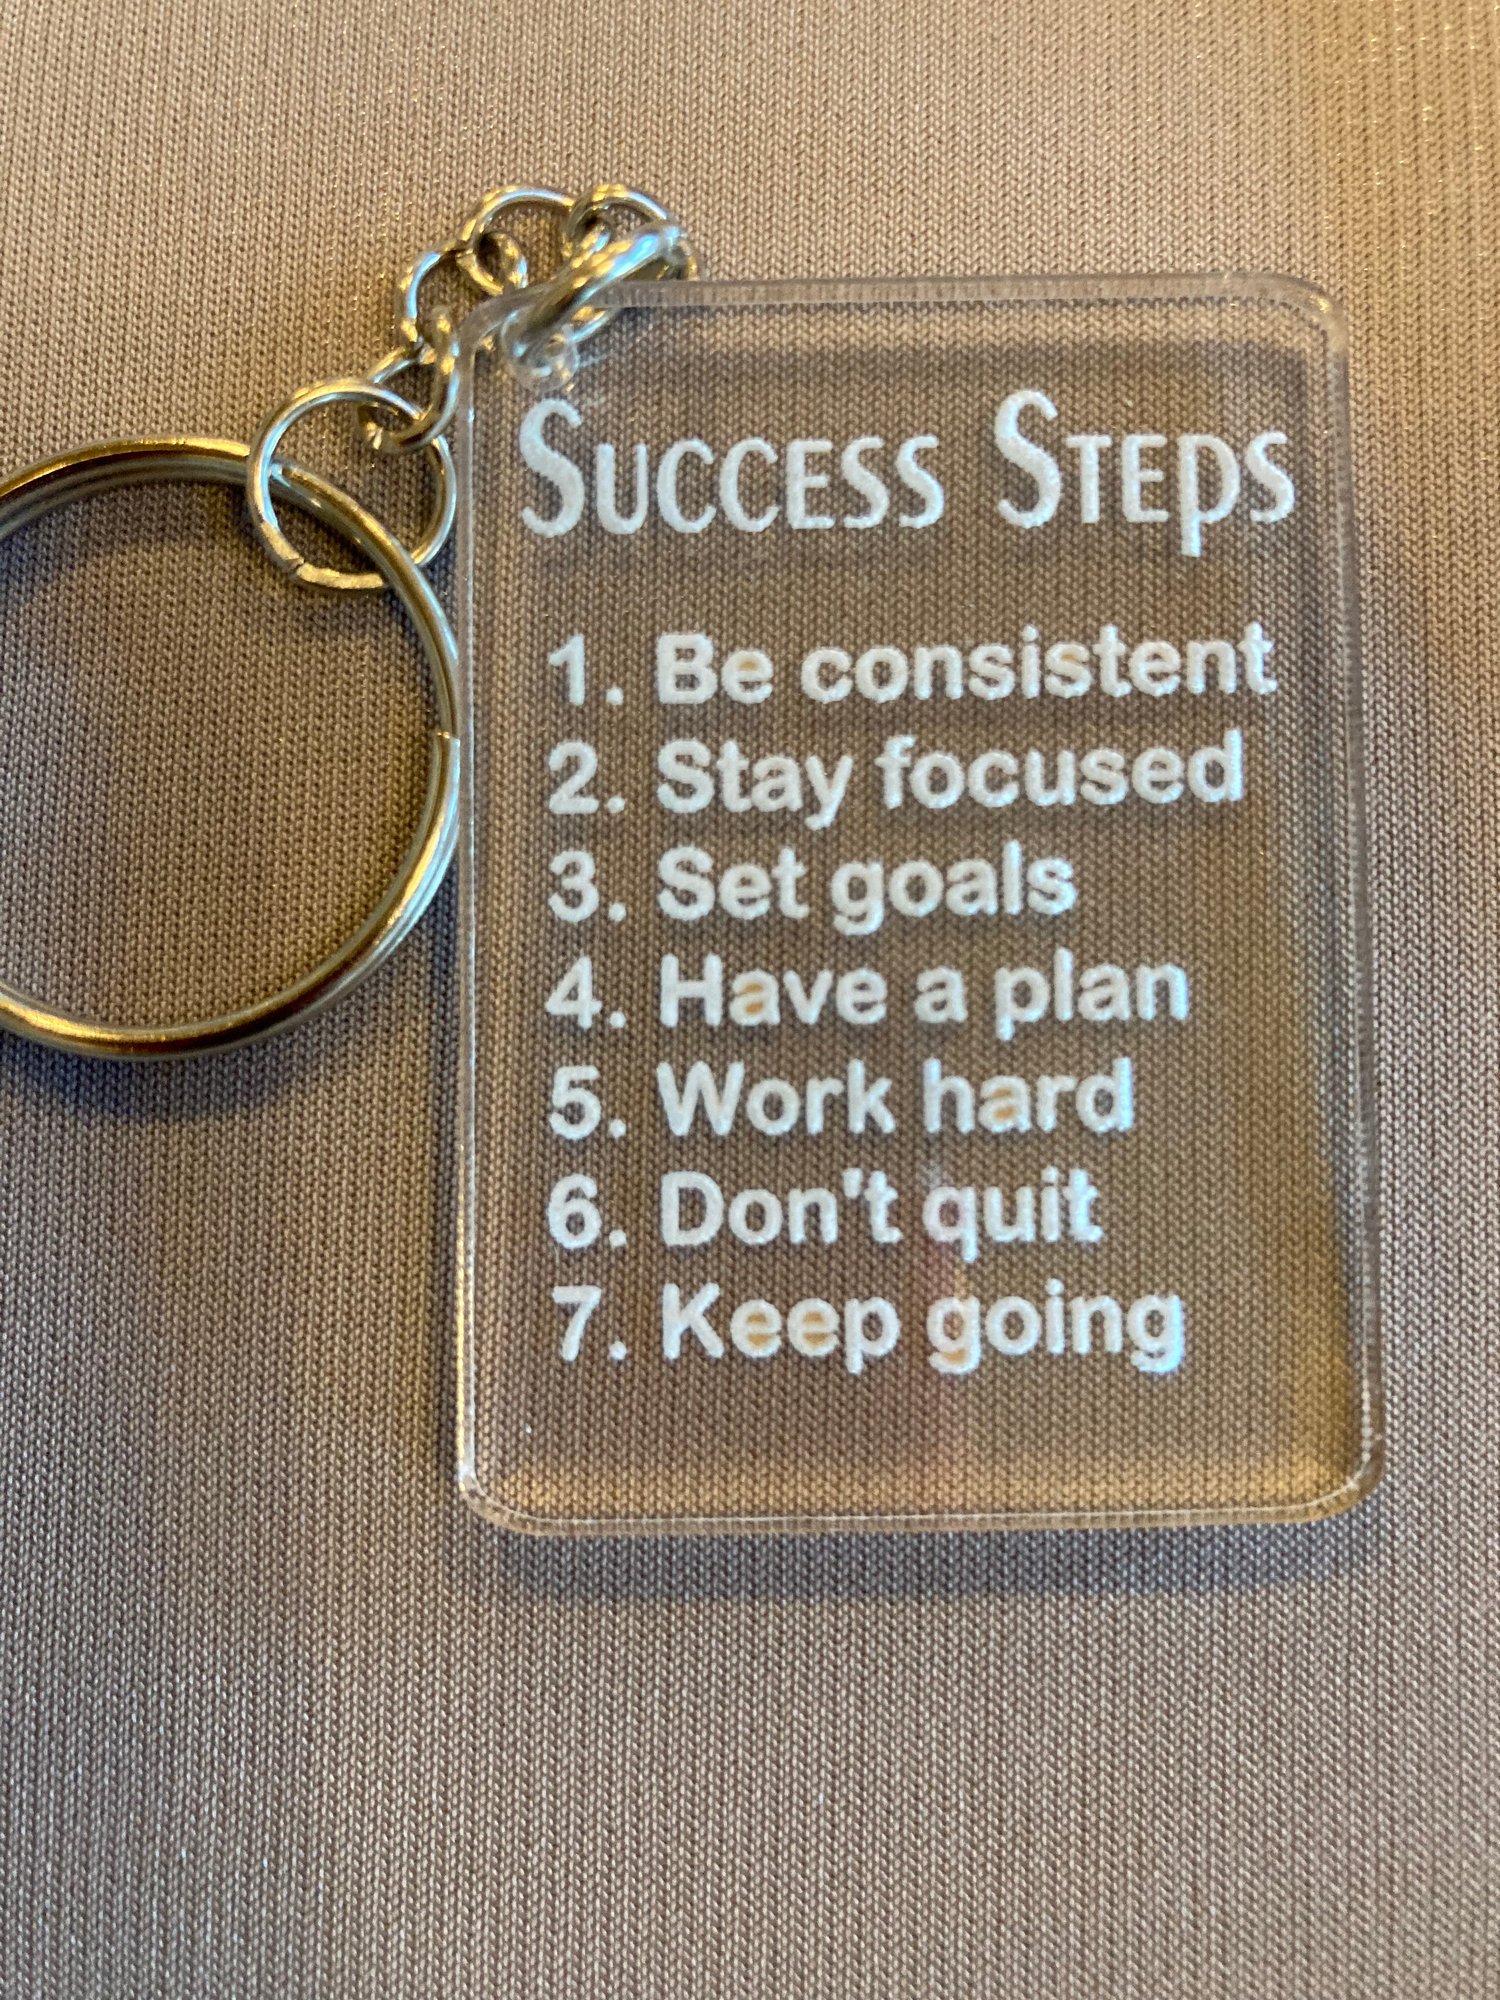 Image of Success steps key chain